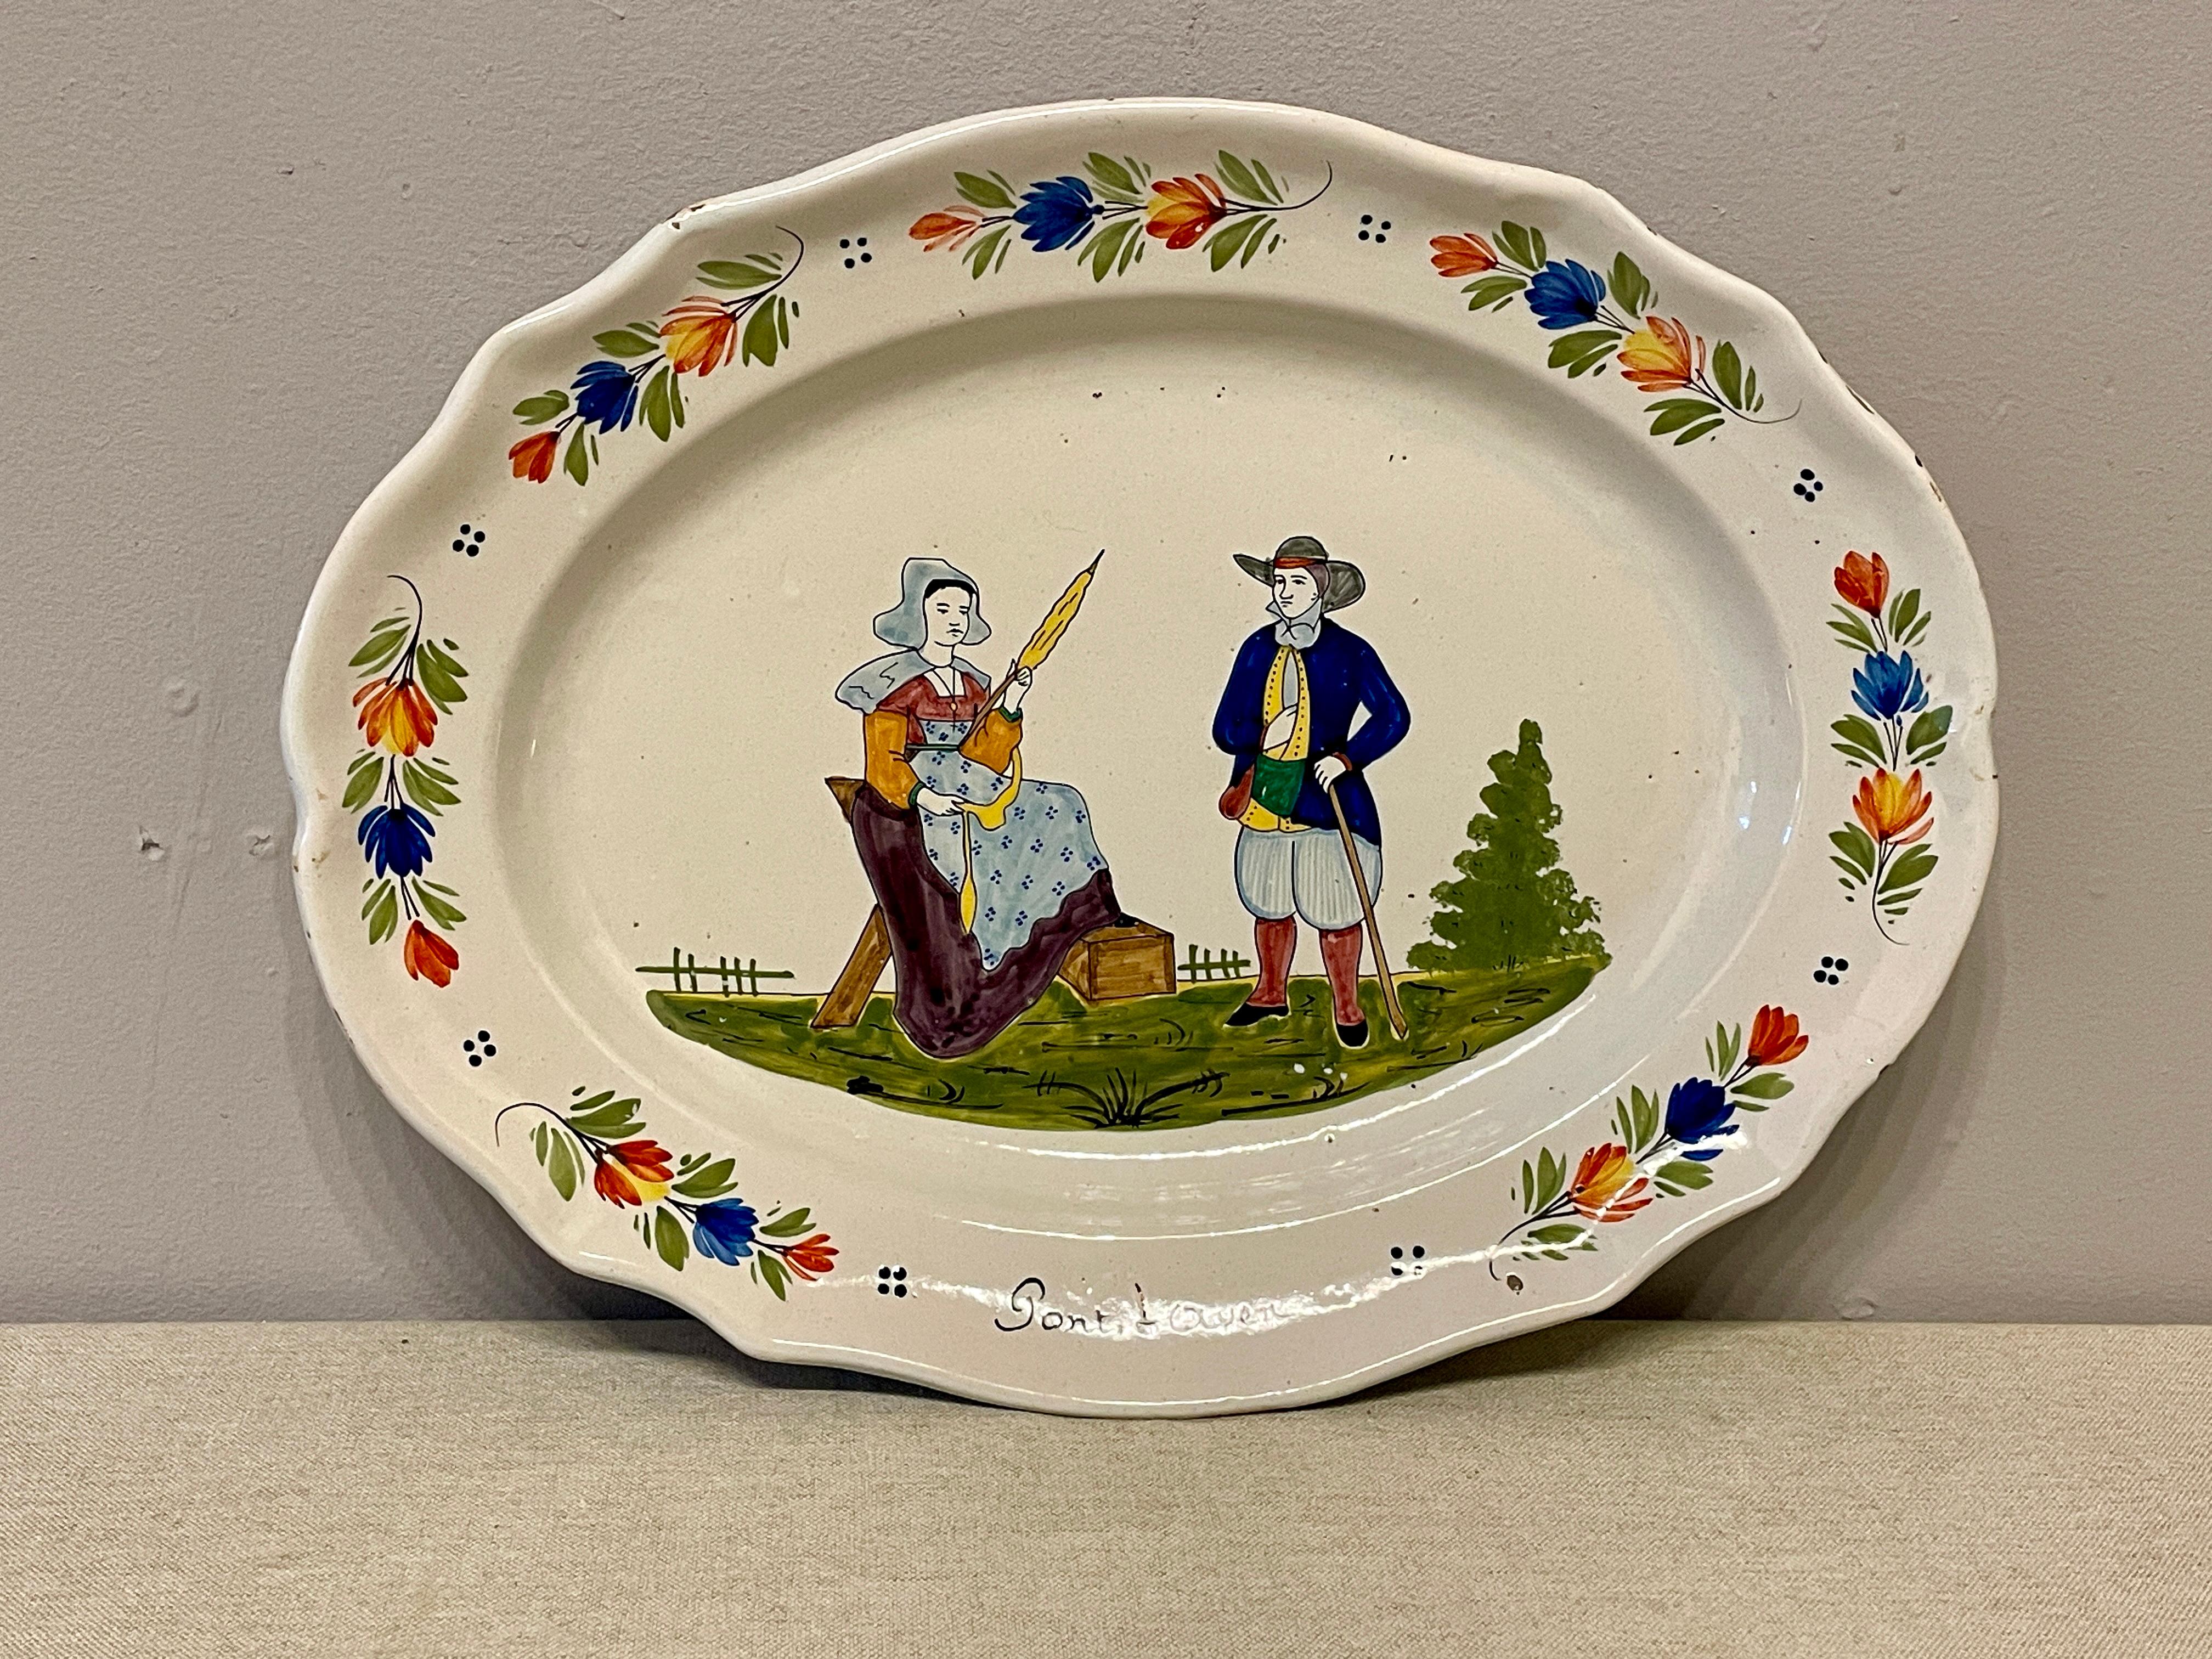 An early 20th century French Faience Quimper platter from Brittany, signed HB, depicting a couple in the field with a women knitting and man watching. The platter is in good condition and no hairline were noted. Minor wear on the edge and no chips.